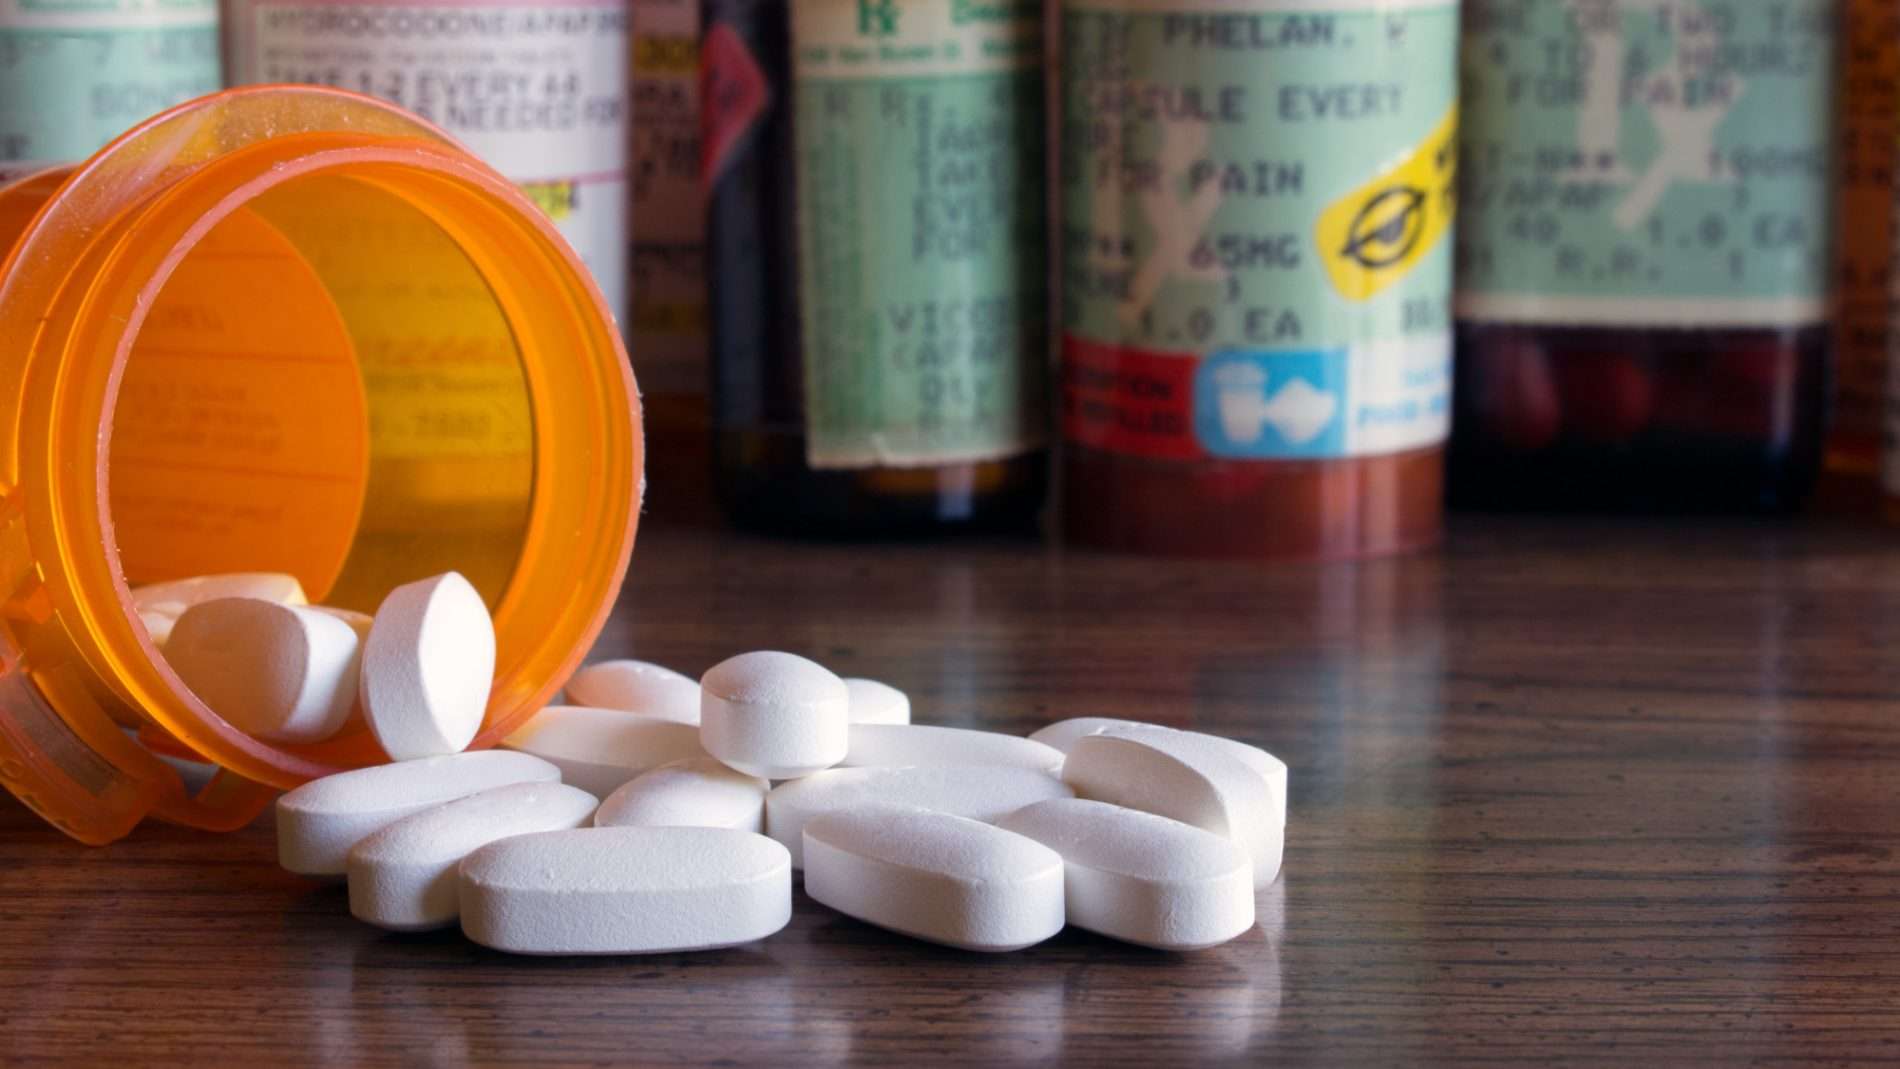 Everything You Need to Know About Addictive Painkillers